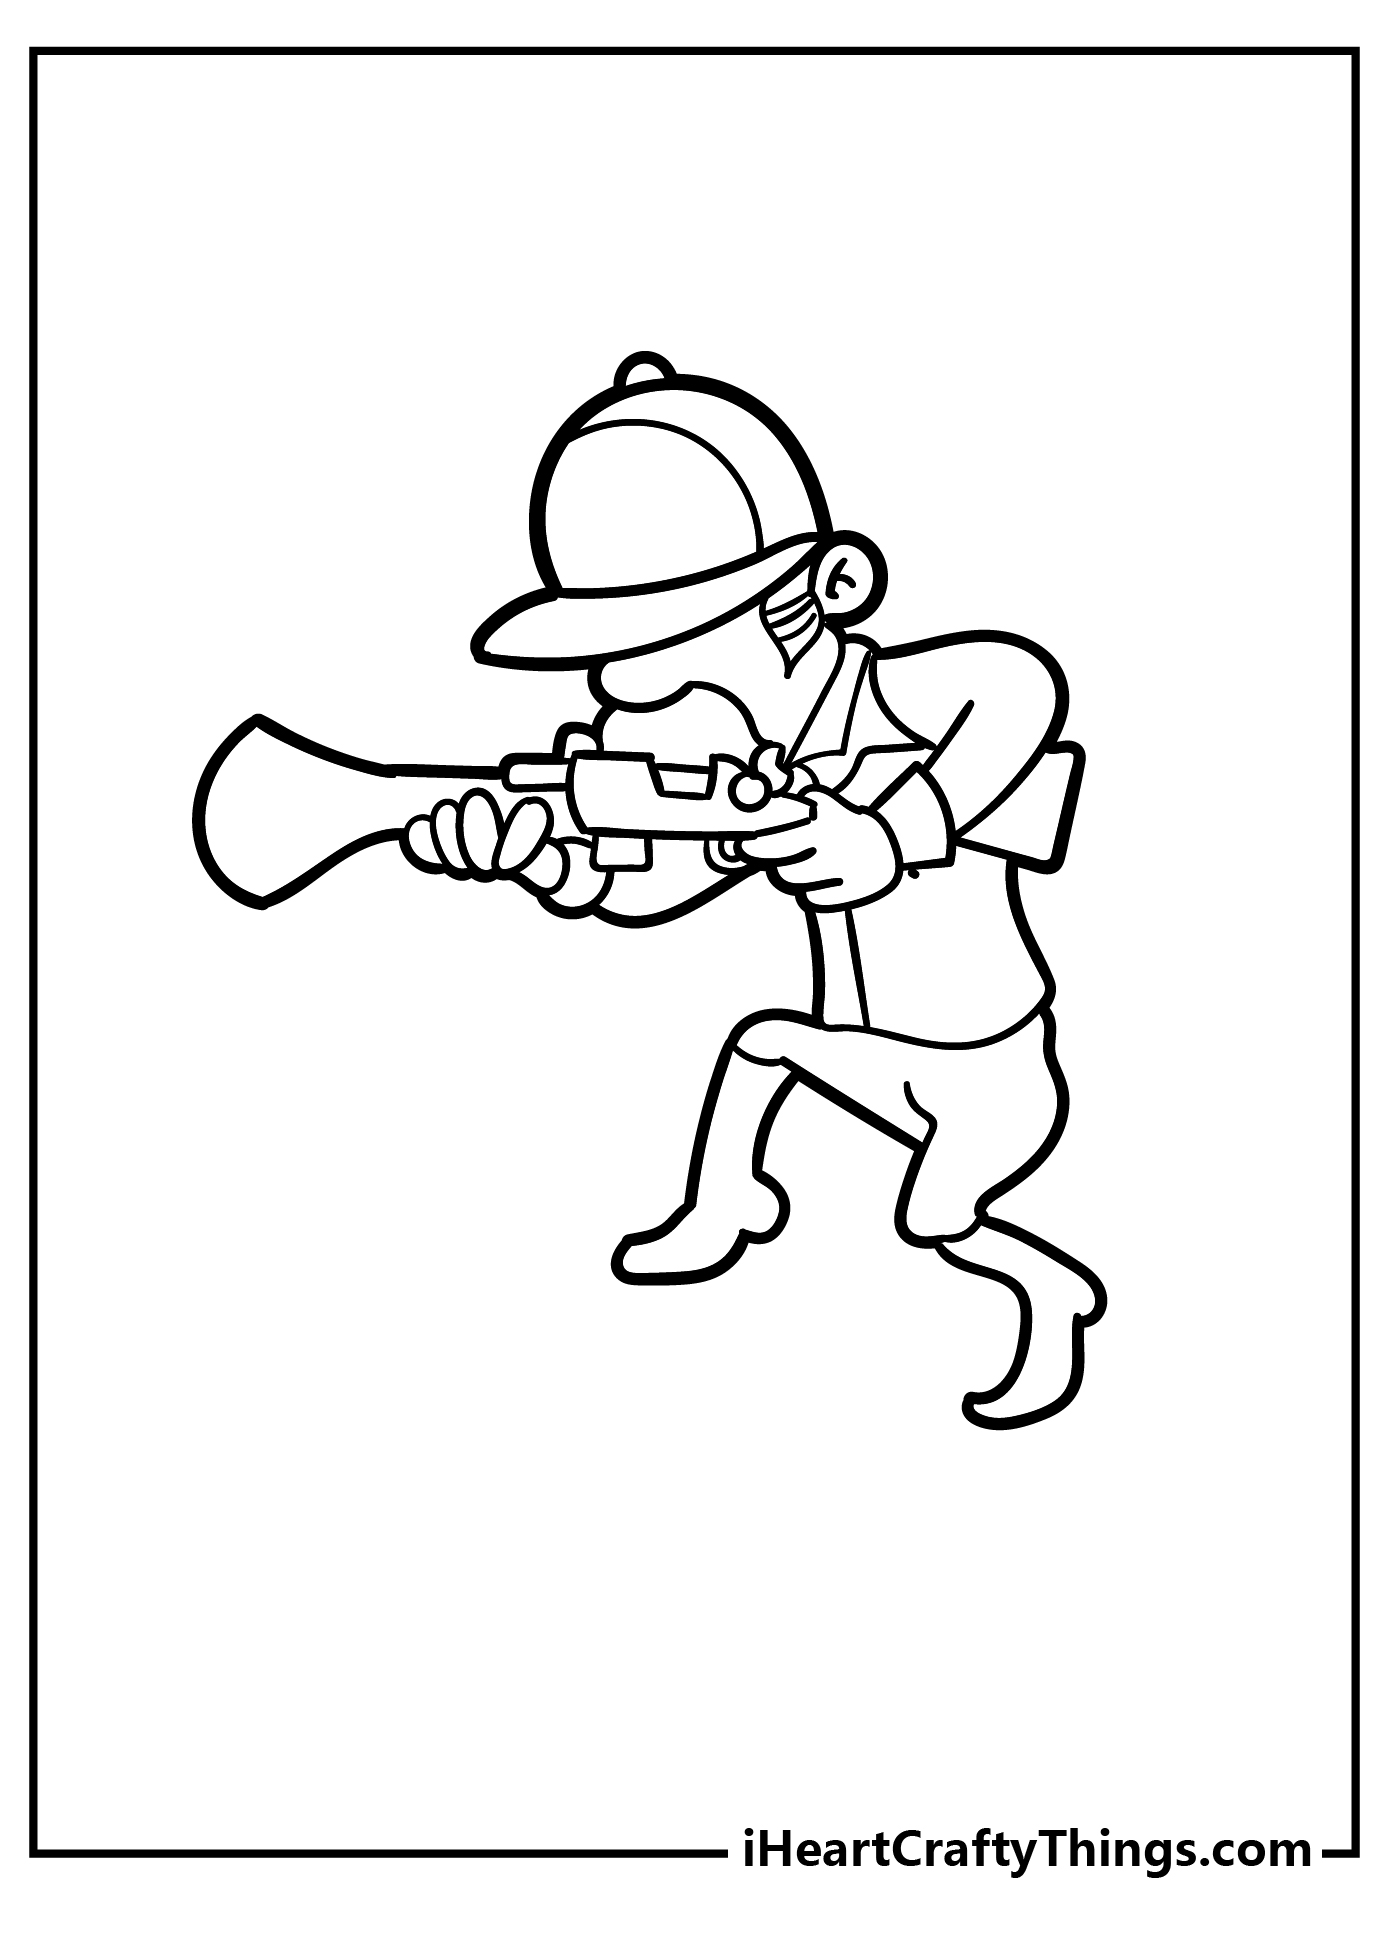 Hunting Coloring Book for adults free download